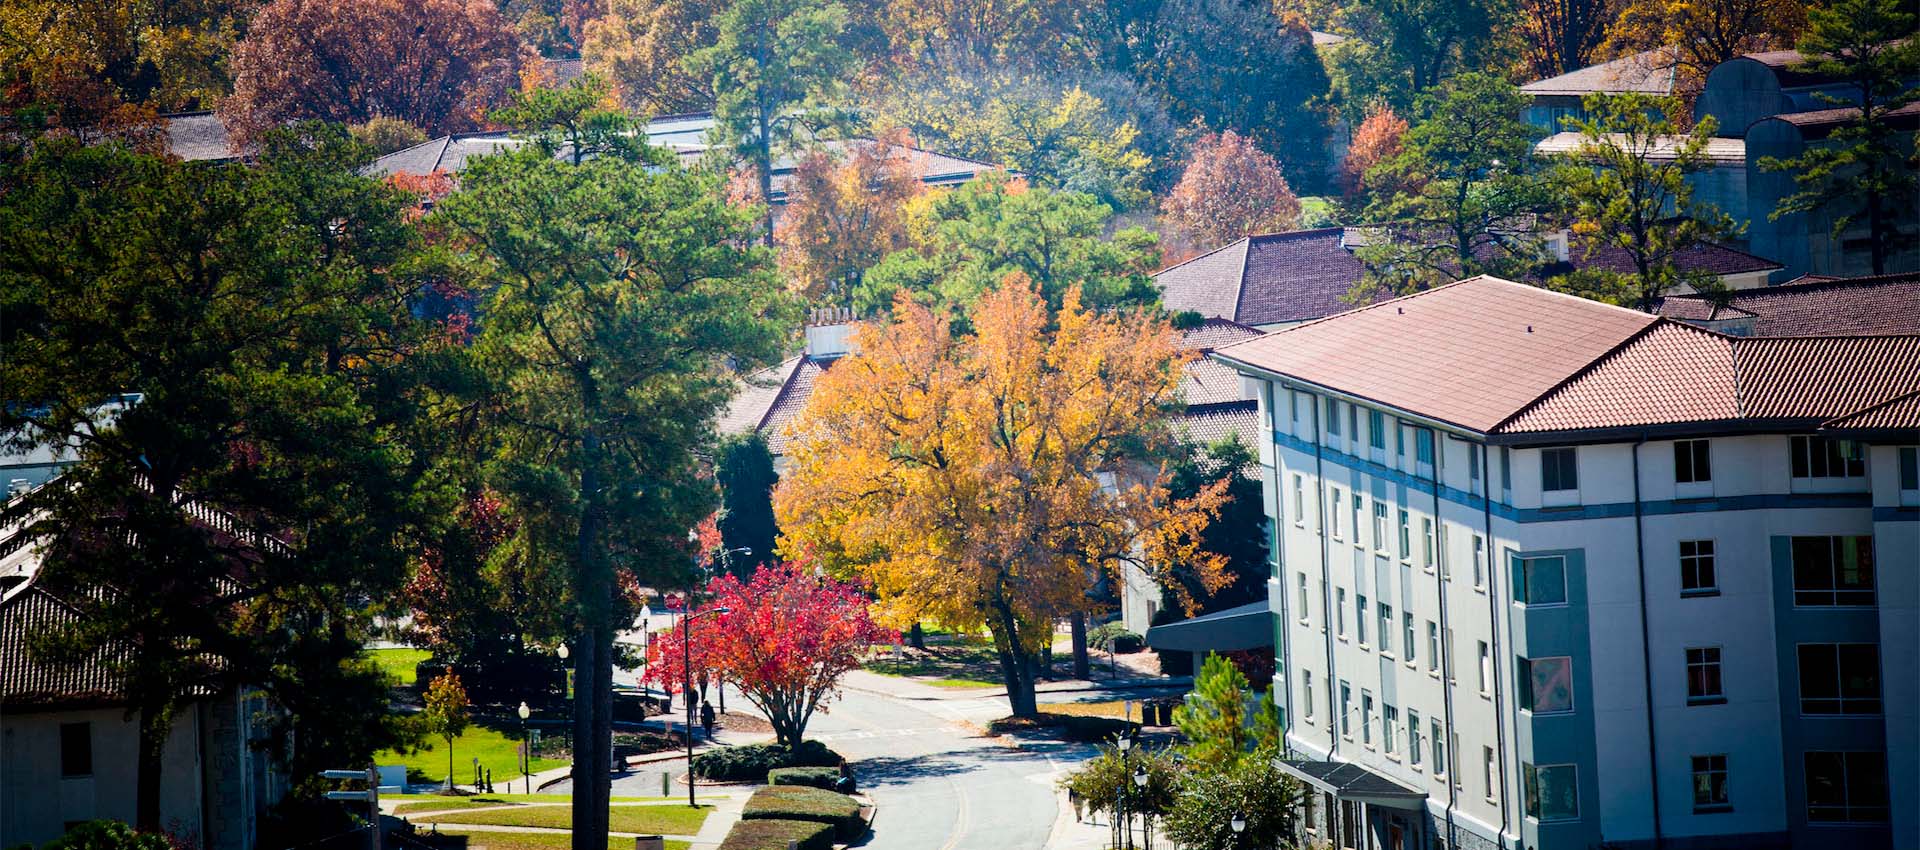 Aerial view of a campus road, buildings, and trees with autumn leaves